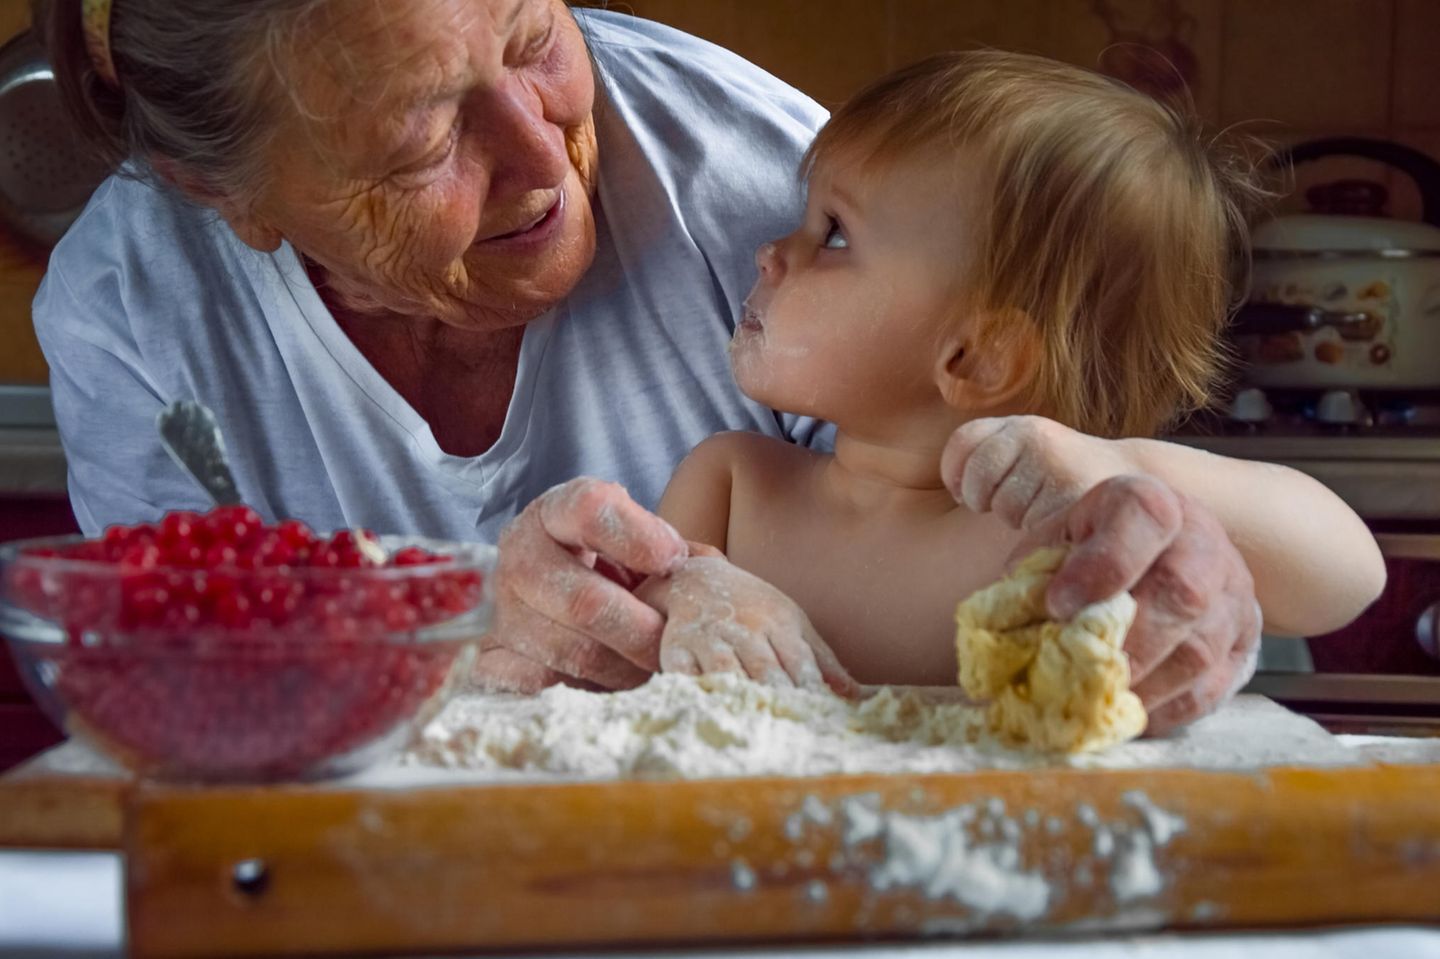 Lifehacks from grandma and grandpa: An older woman bakes "loading =" lazy with her grandson